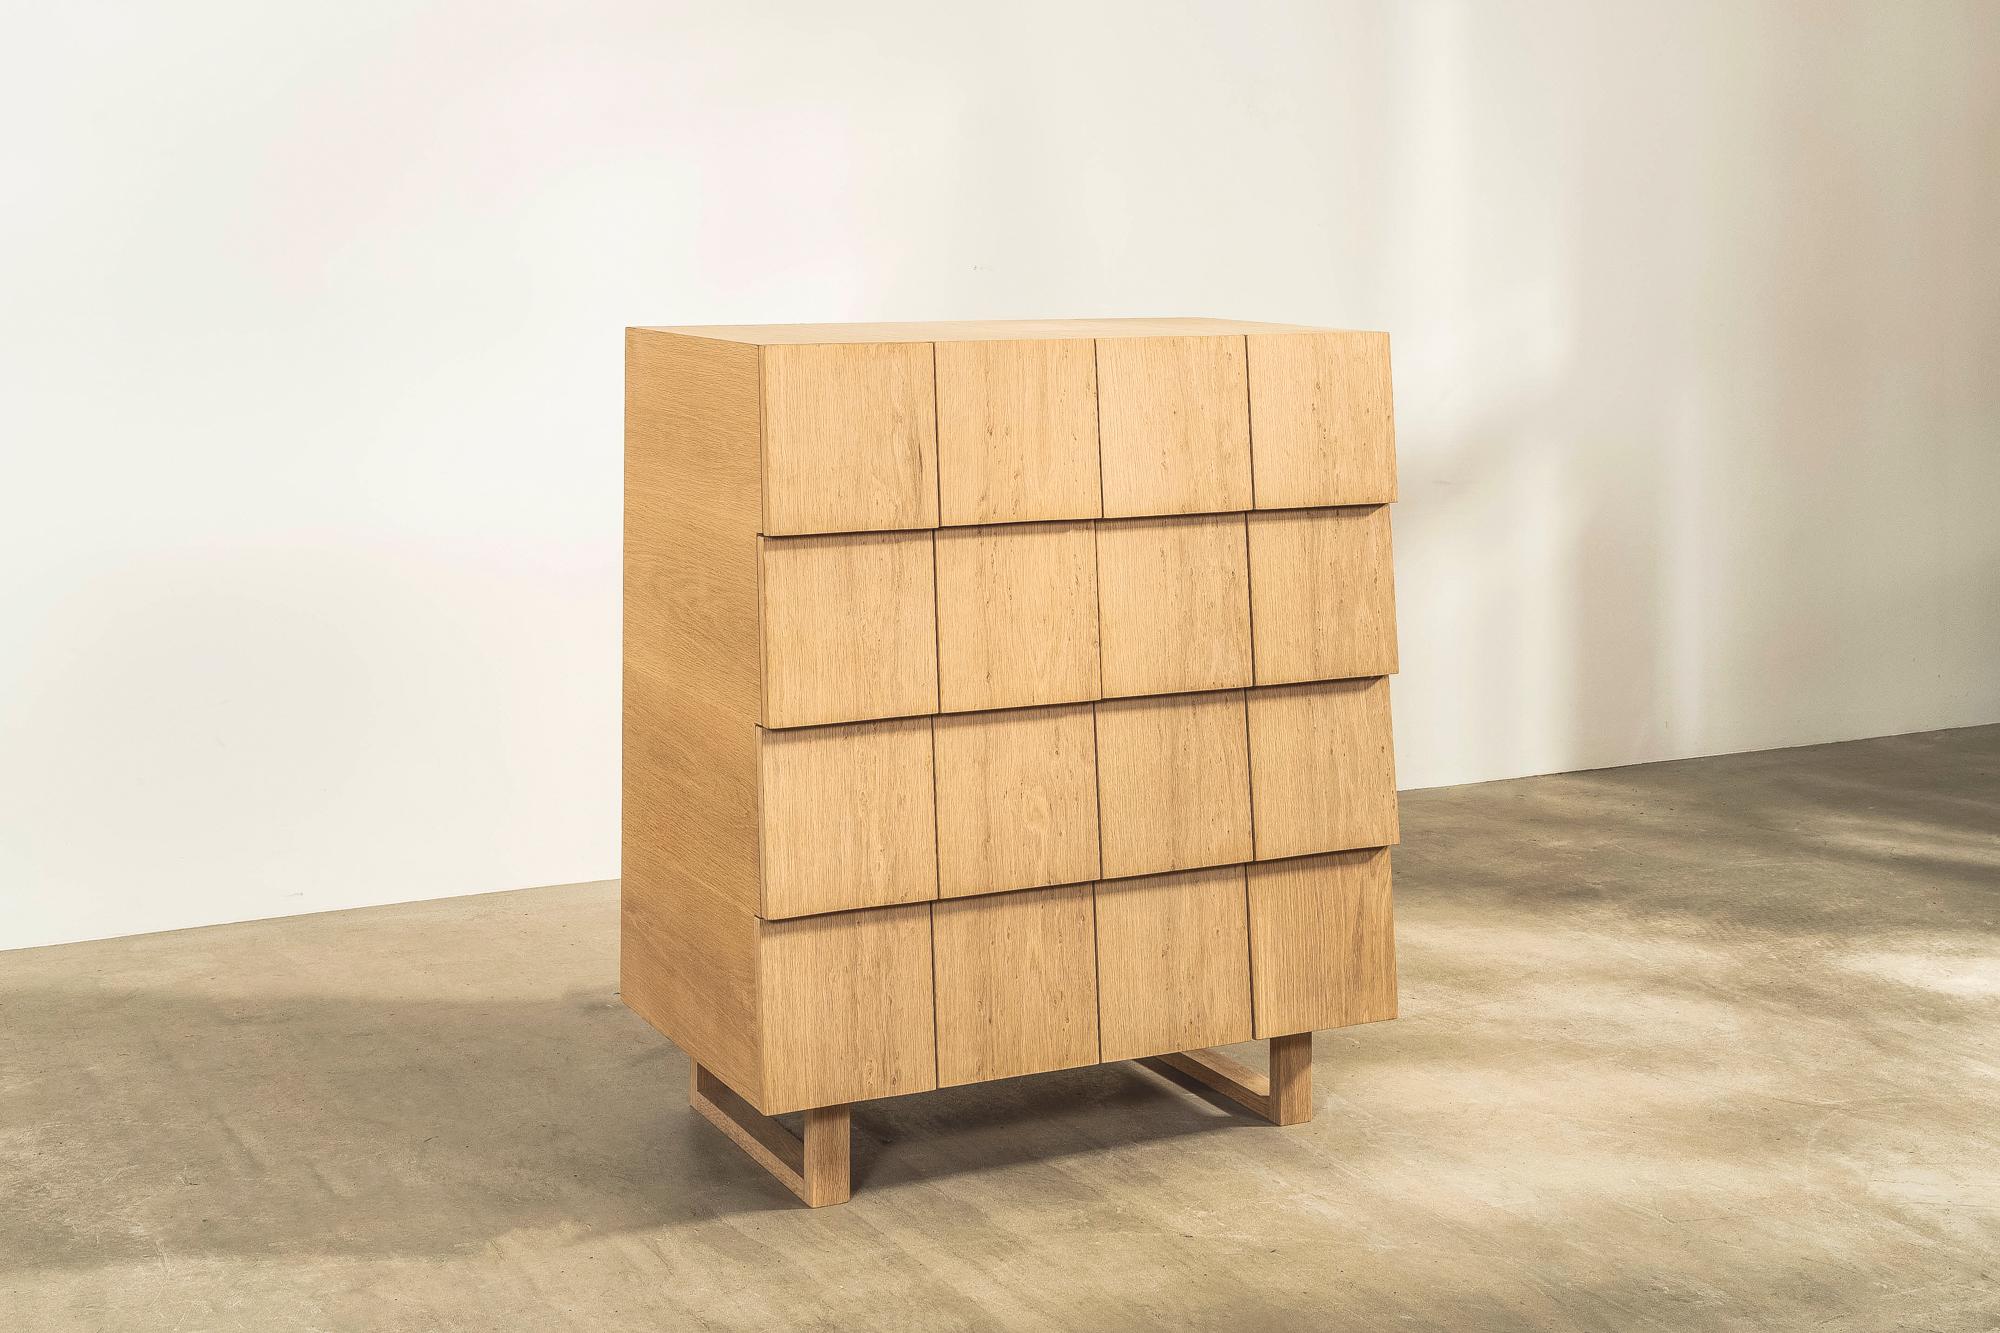 A stunning lacquered oak chest with solid wood drawers, designed by Industrial and furniture designers Shin and Tomoko Azumi. 

The fronts are consistent but hide a variety of different sized drawers. Starting with the top row, the number of